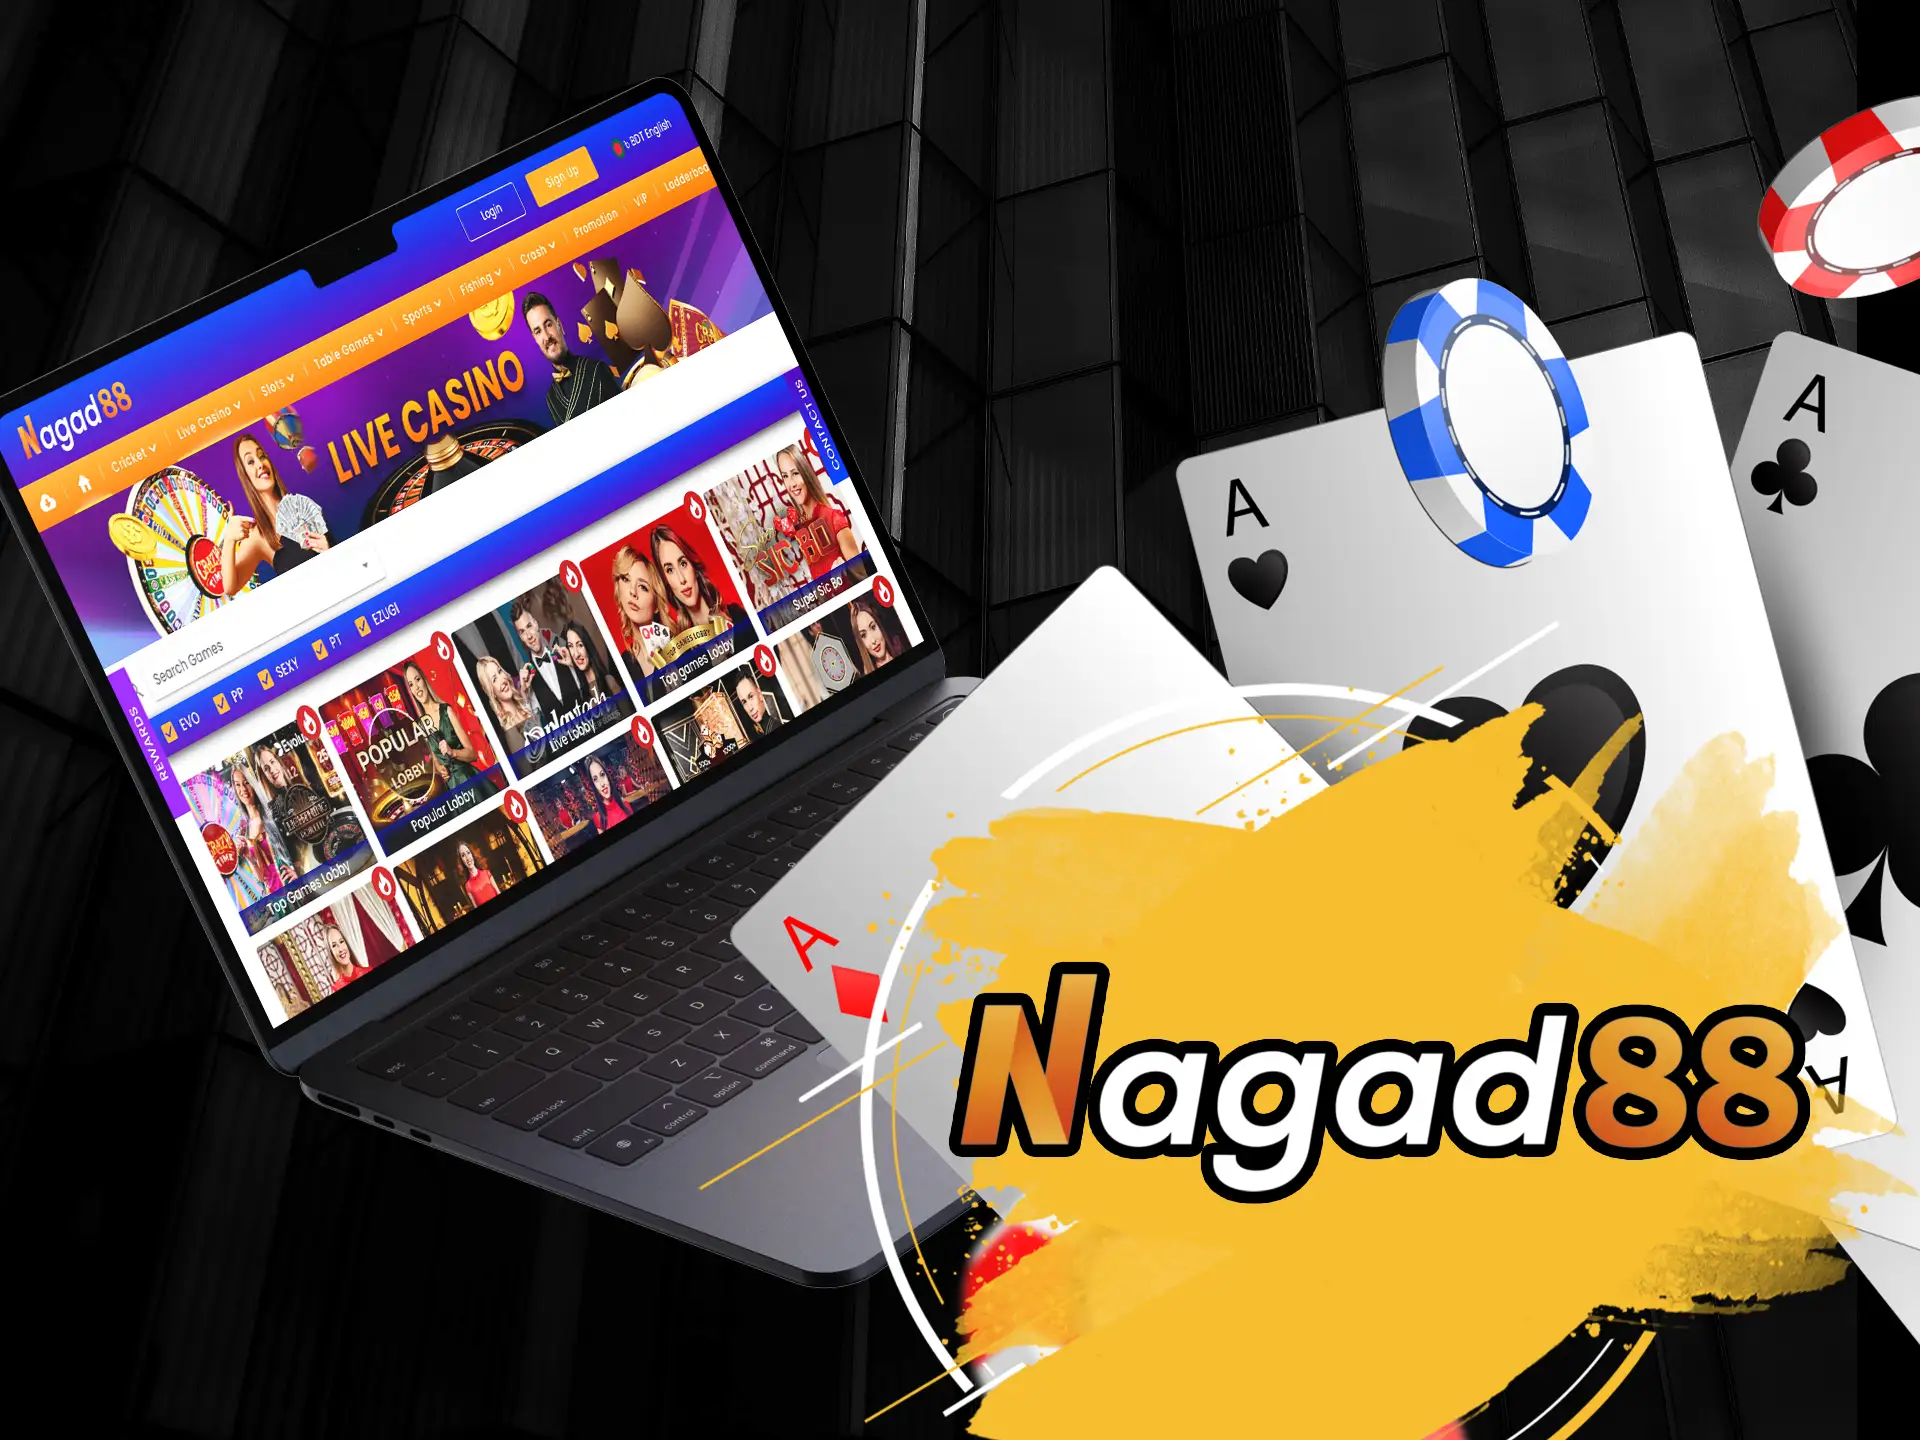 Dive headfirst into the wonderful world of Nagad88 Casino, which began operations in 2023 and has already earned a reputation.